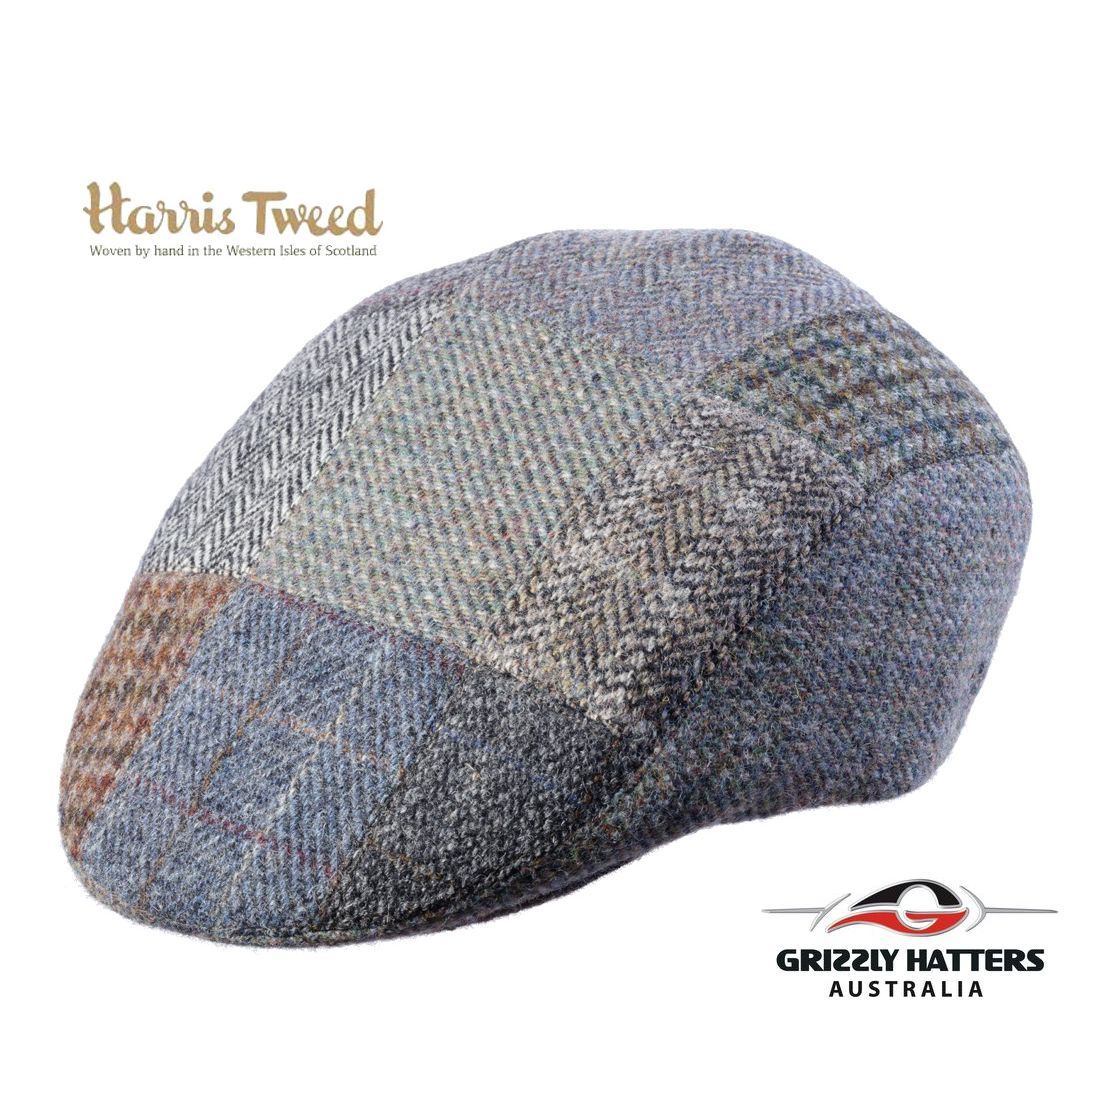 Quality Harris Tweed Wool Flat Cap in Patchwork colours adjustable size gift for him 